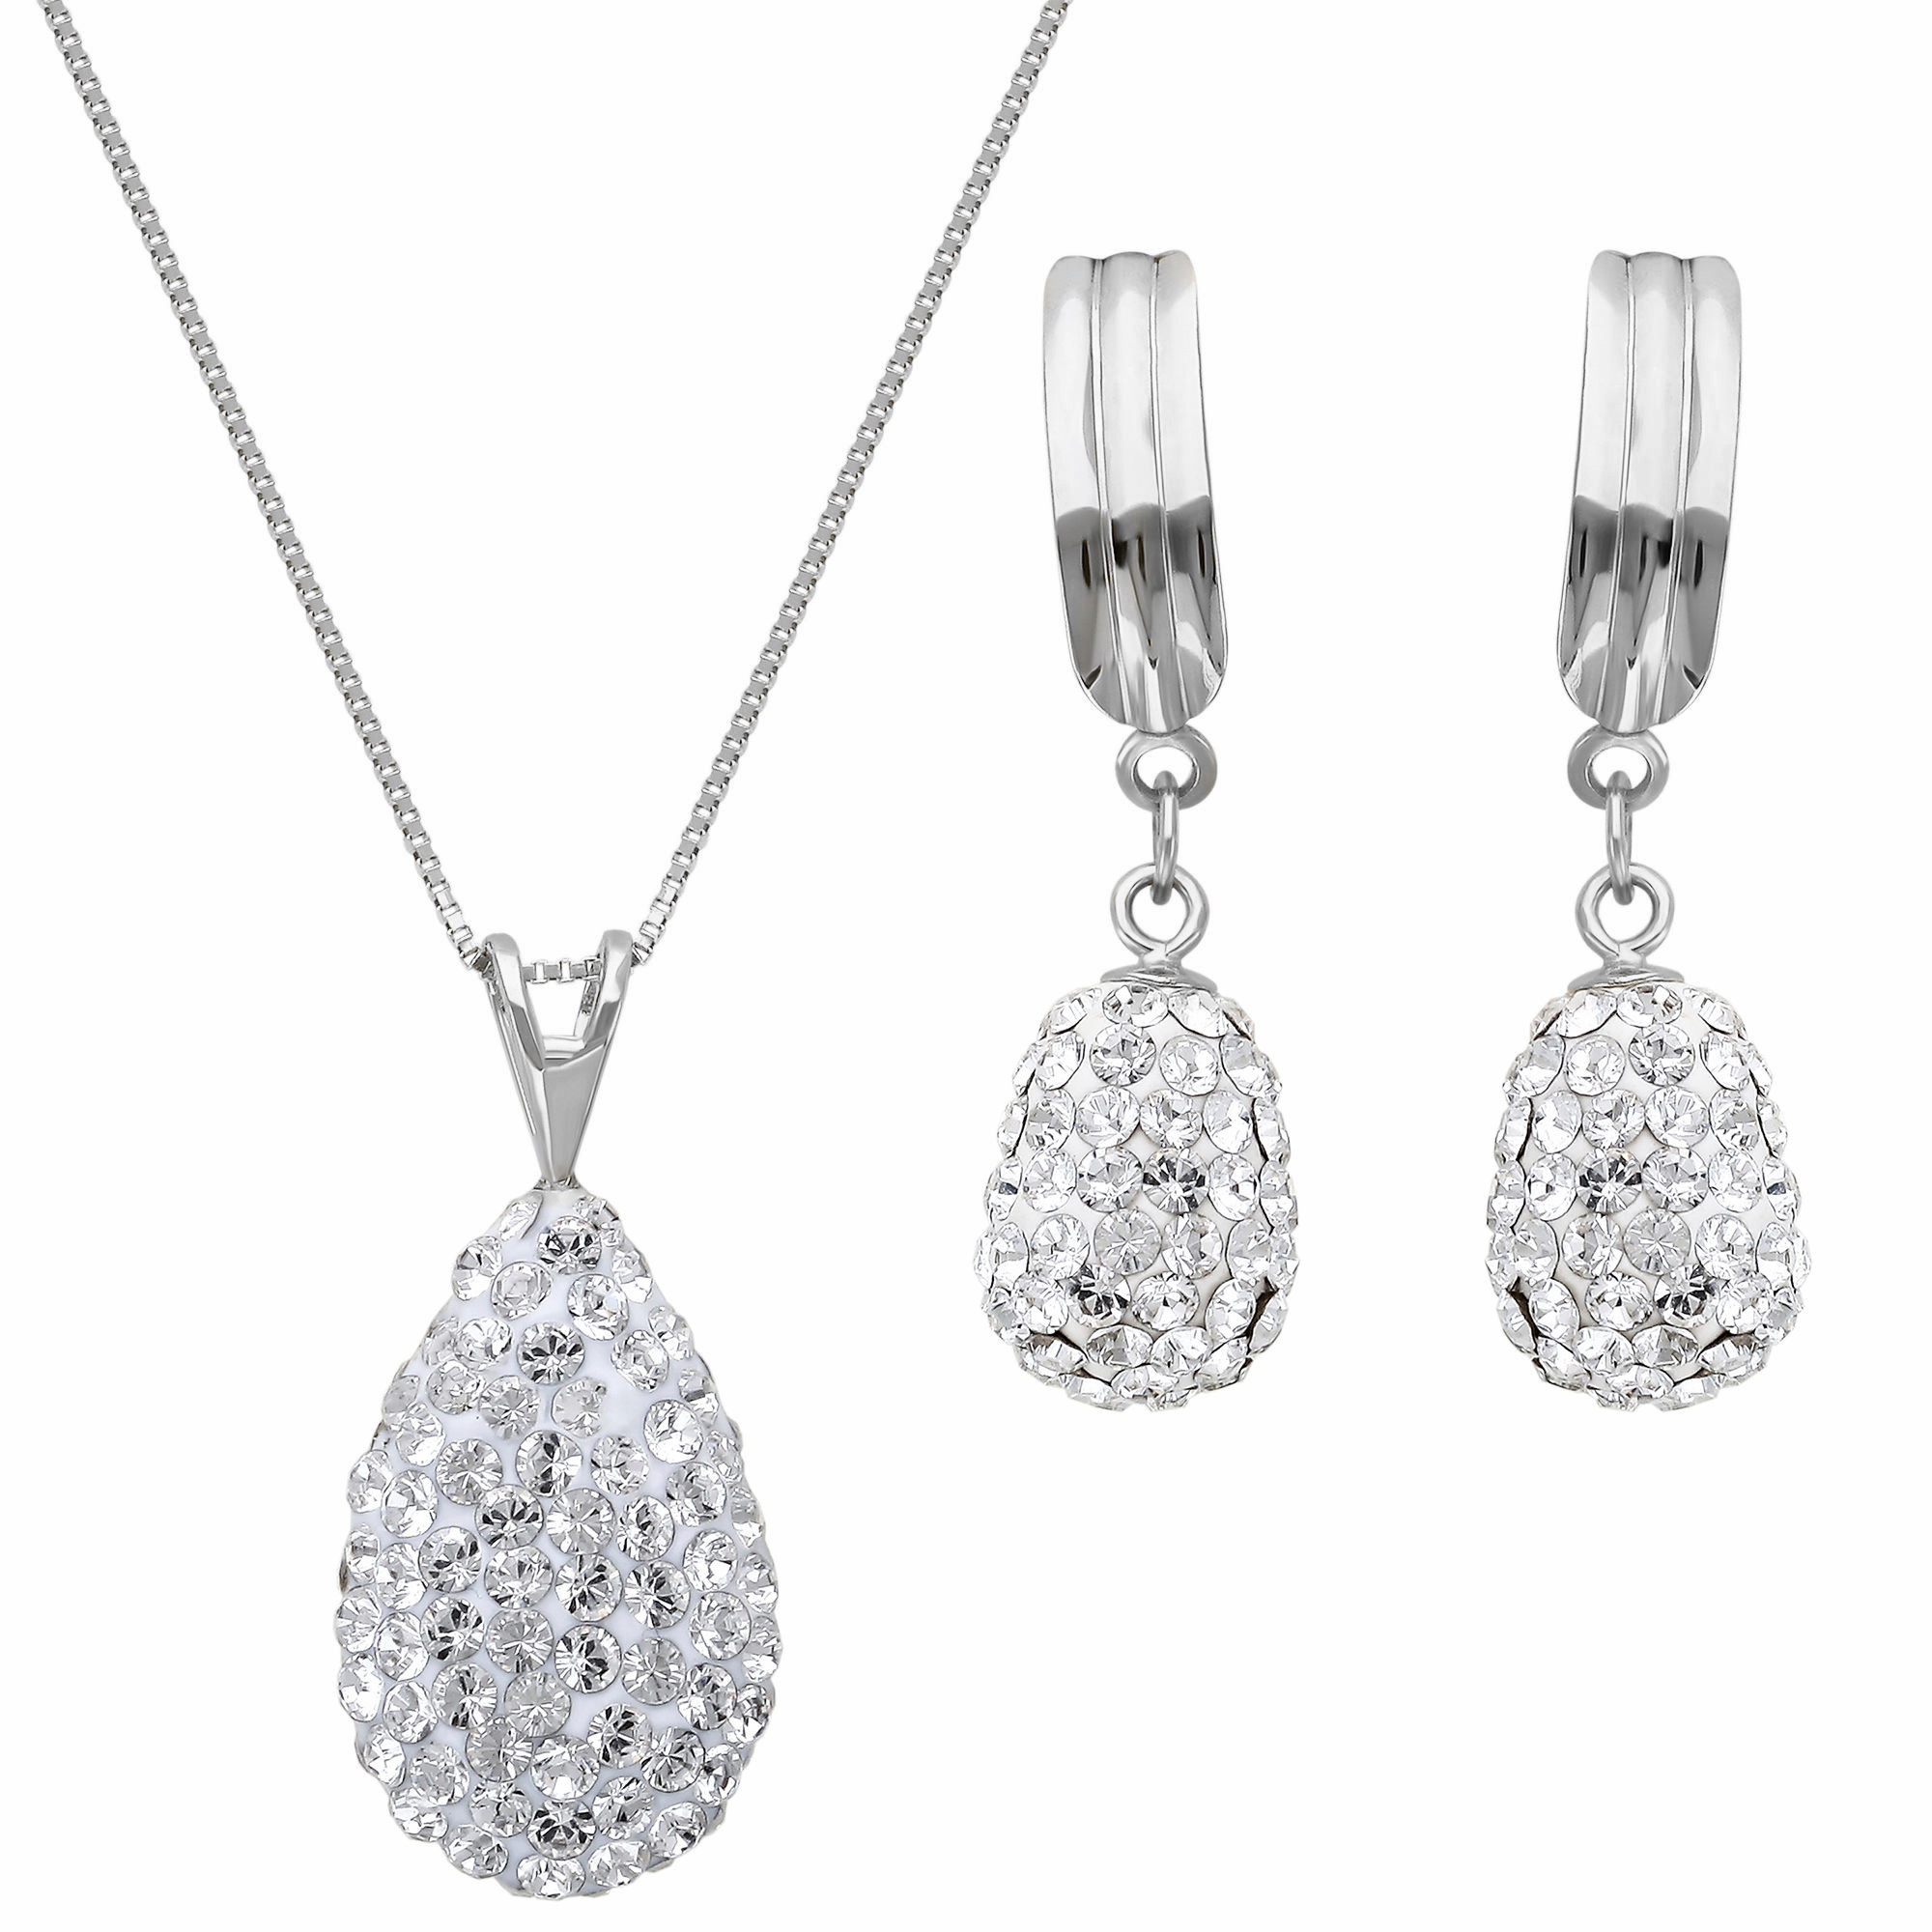 Rhodium Plated Puffed Teardrop Crystal Necklace And Earrings Set